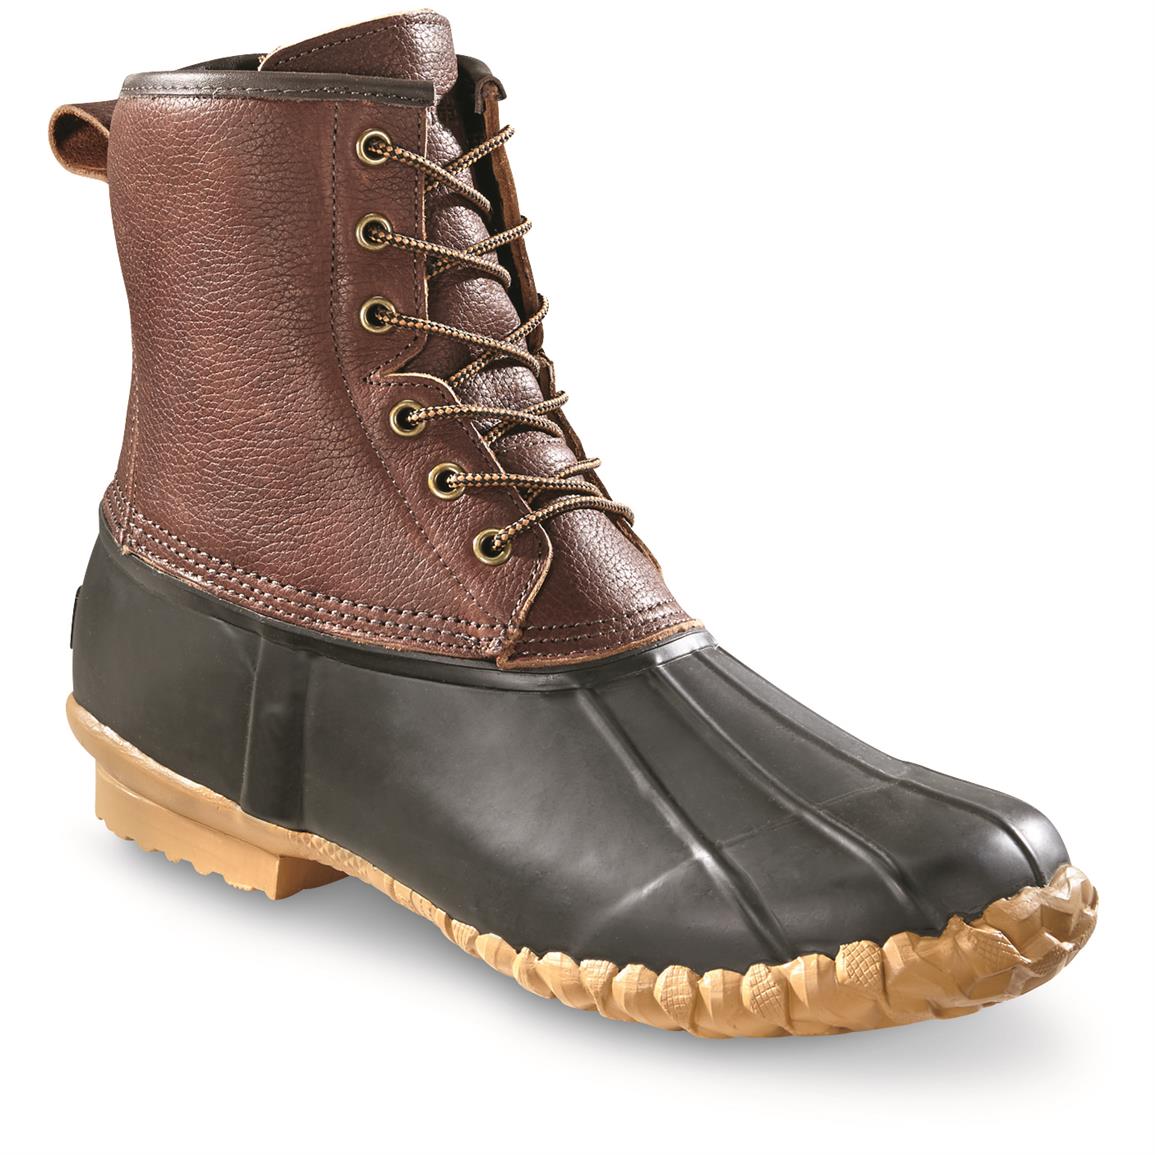 Duck Boots For Men